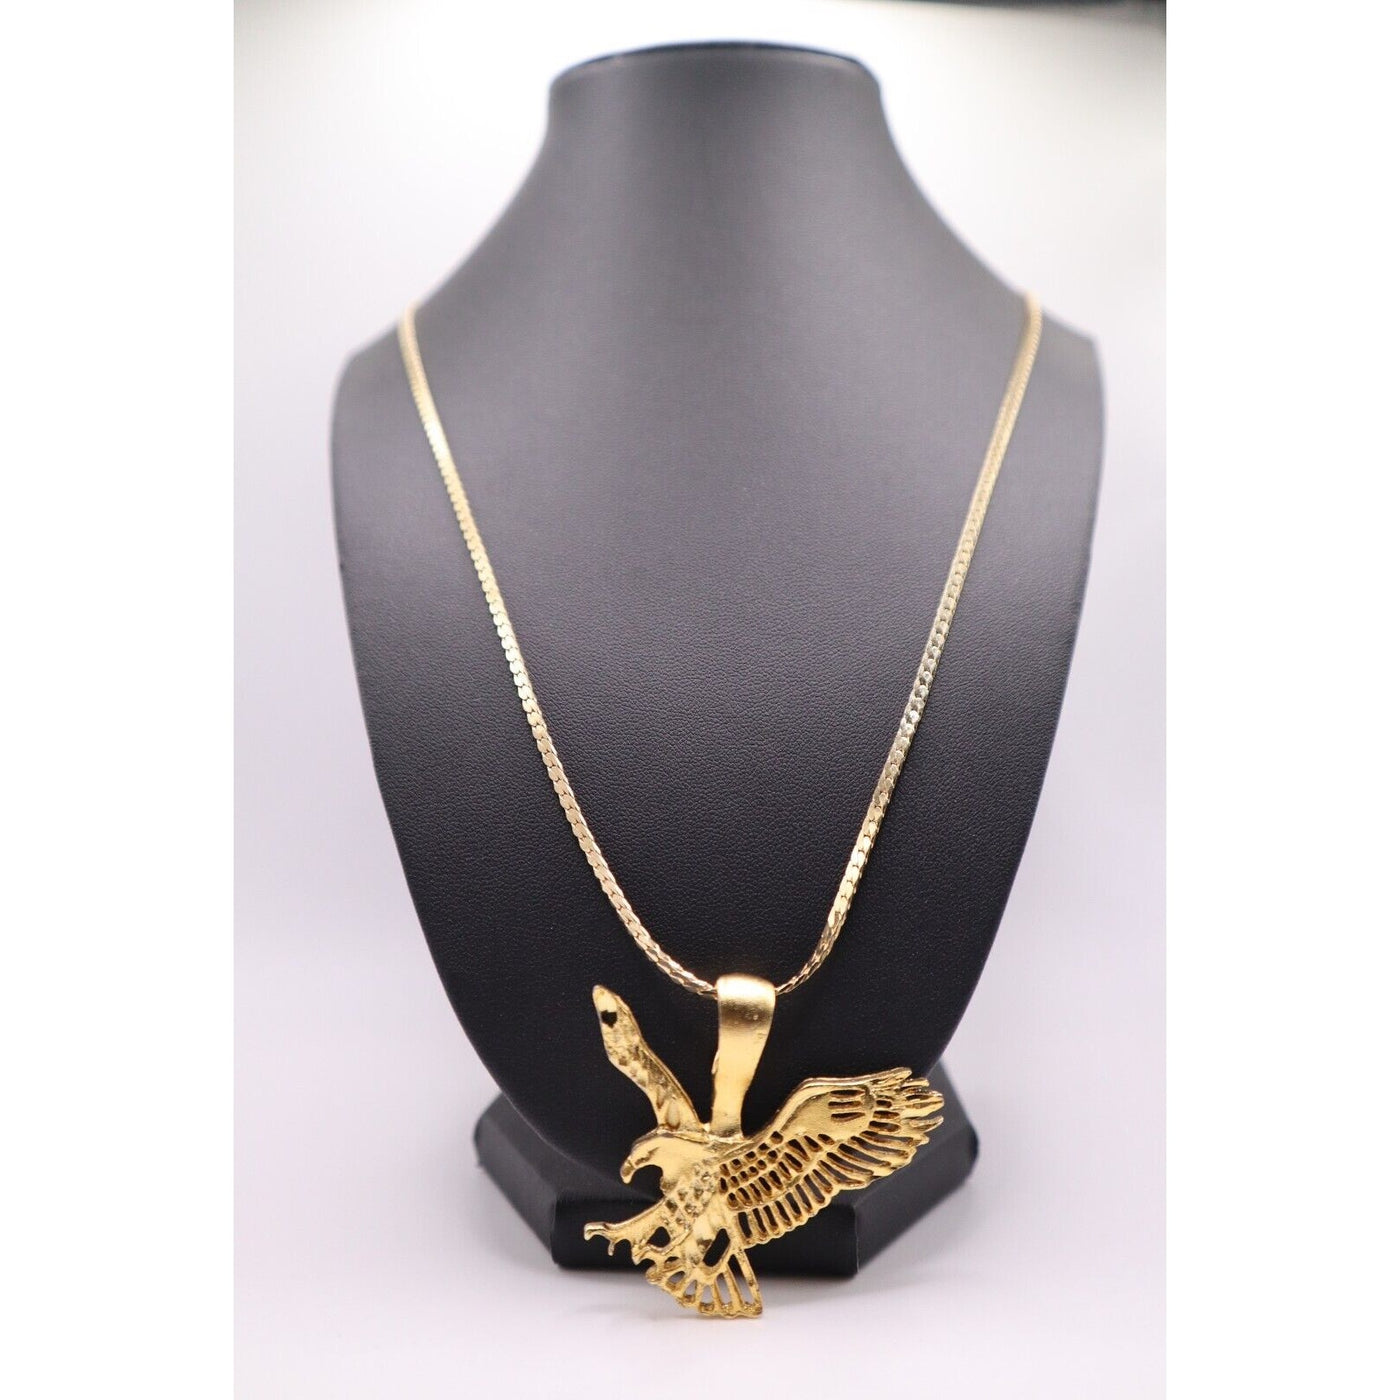 Unisex Gold Plated Necklace with Free Eagle Pendant